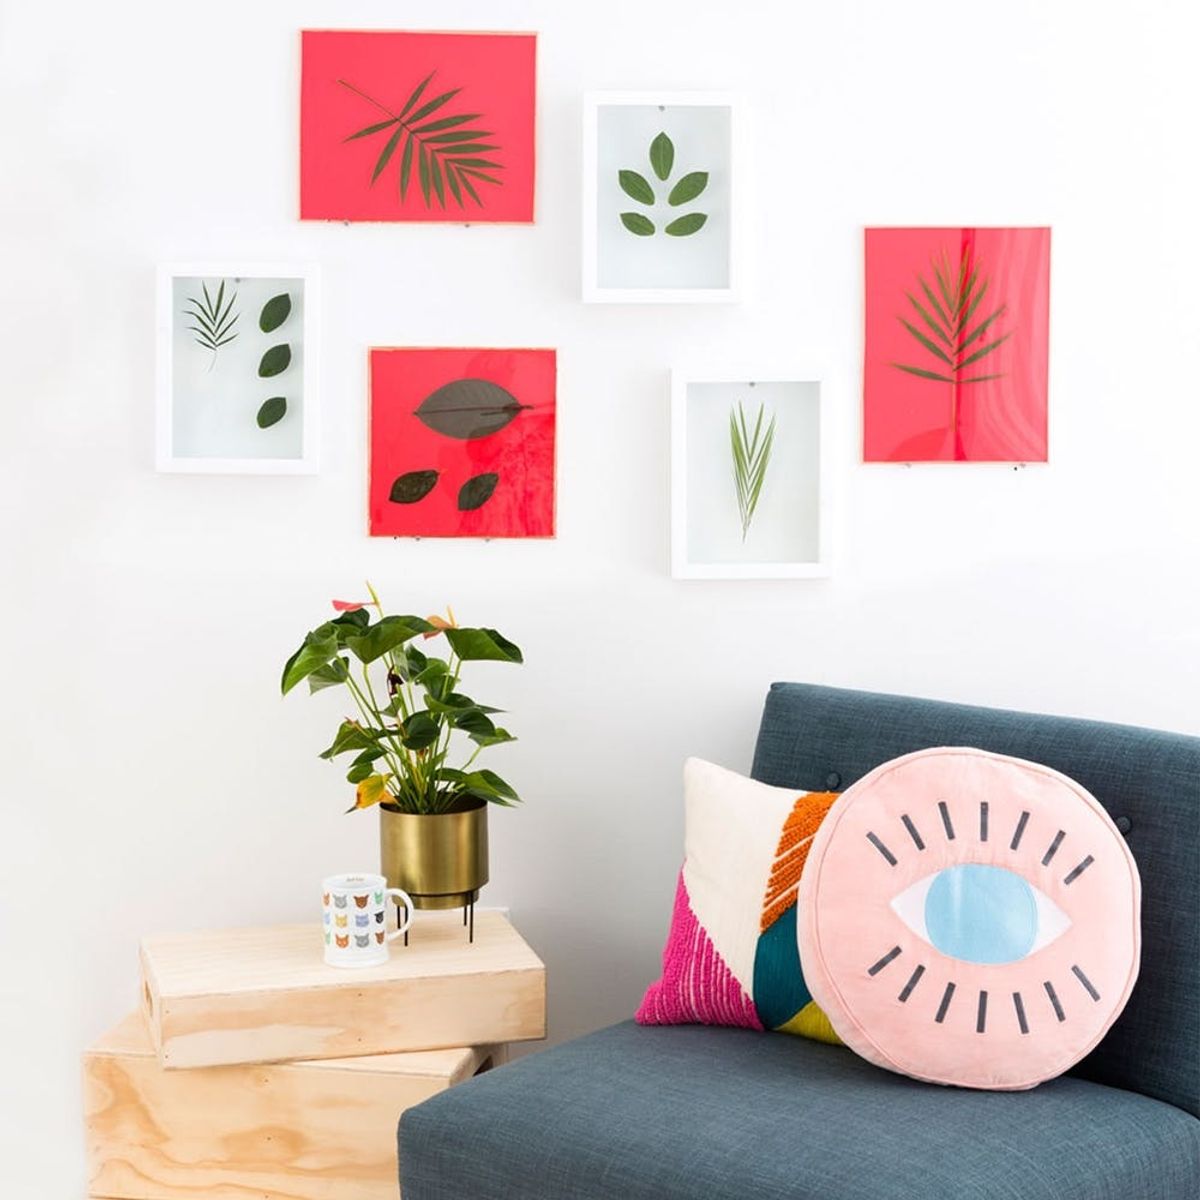 Save the Summer Green All Year Long with DIY Pressed Leaf Wall Art